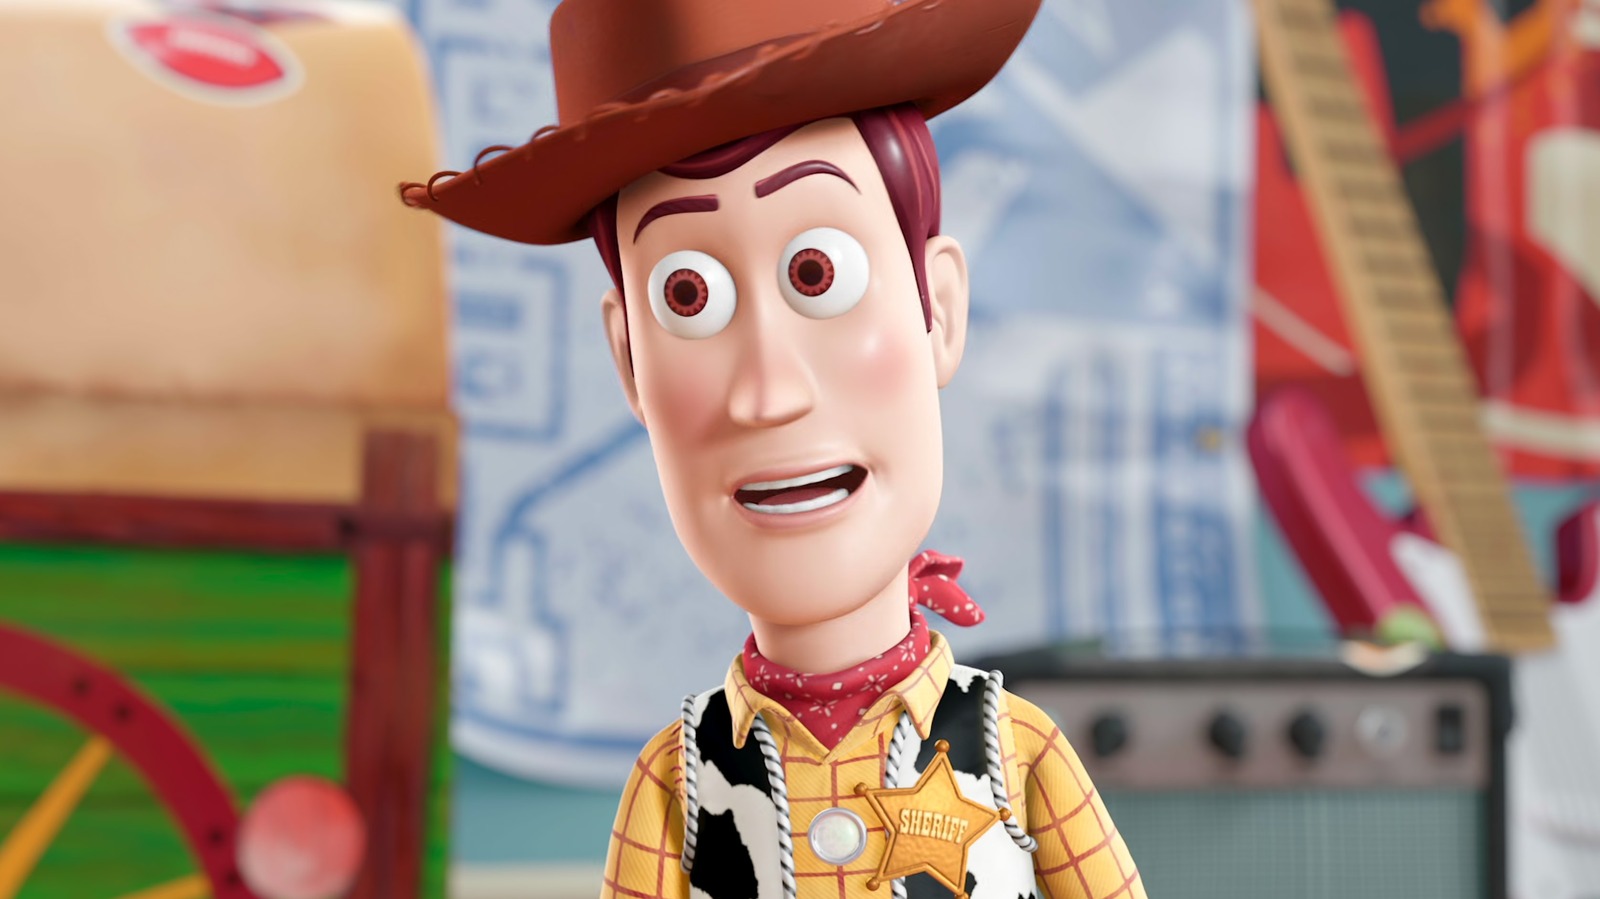 Toy Story 5 Cast And More Details